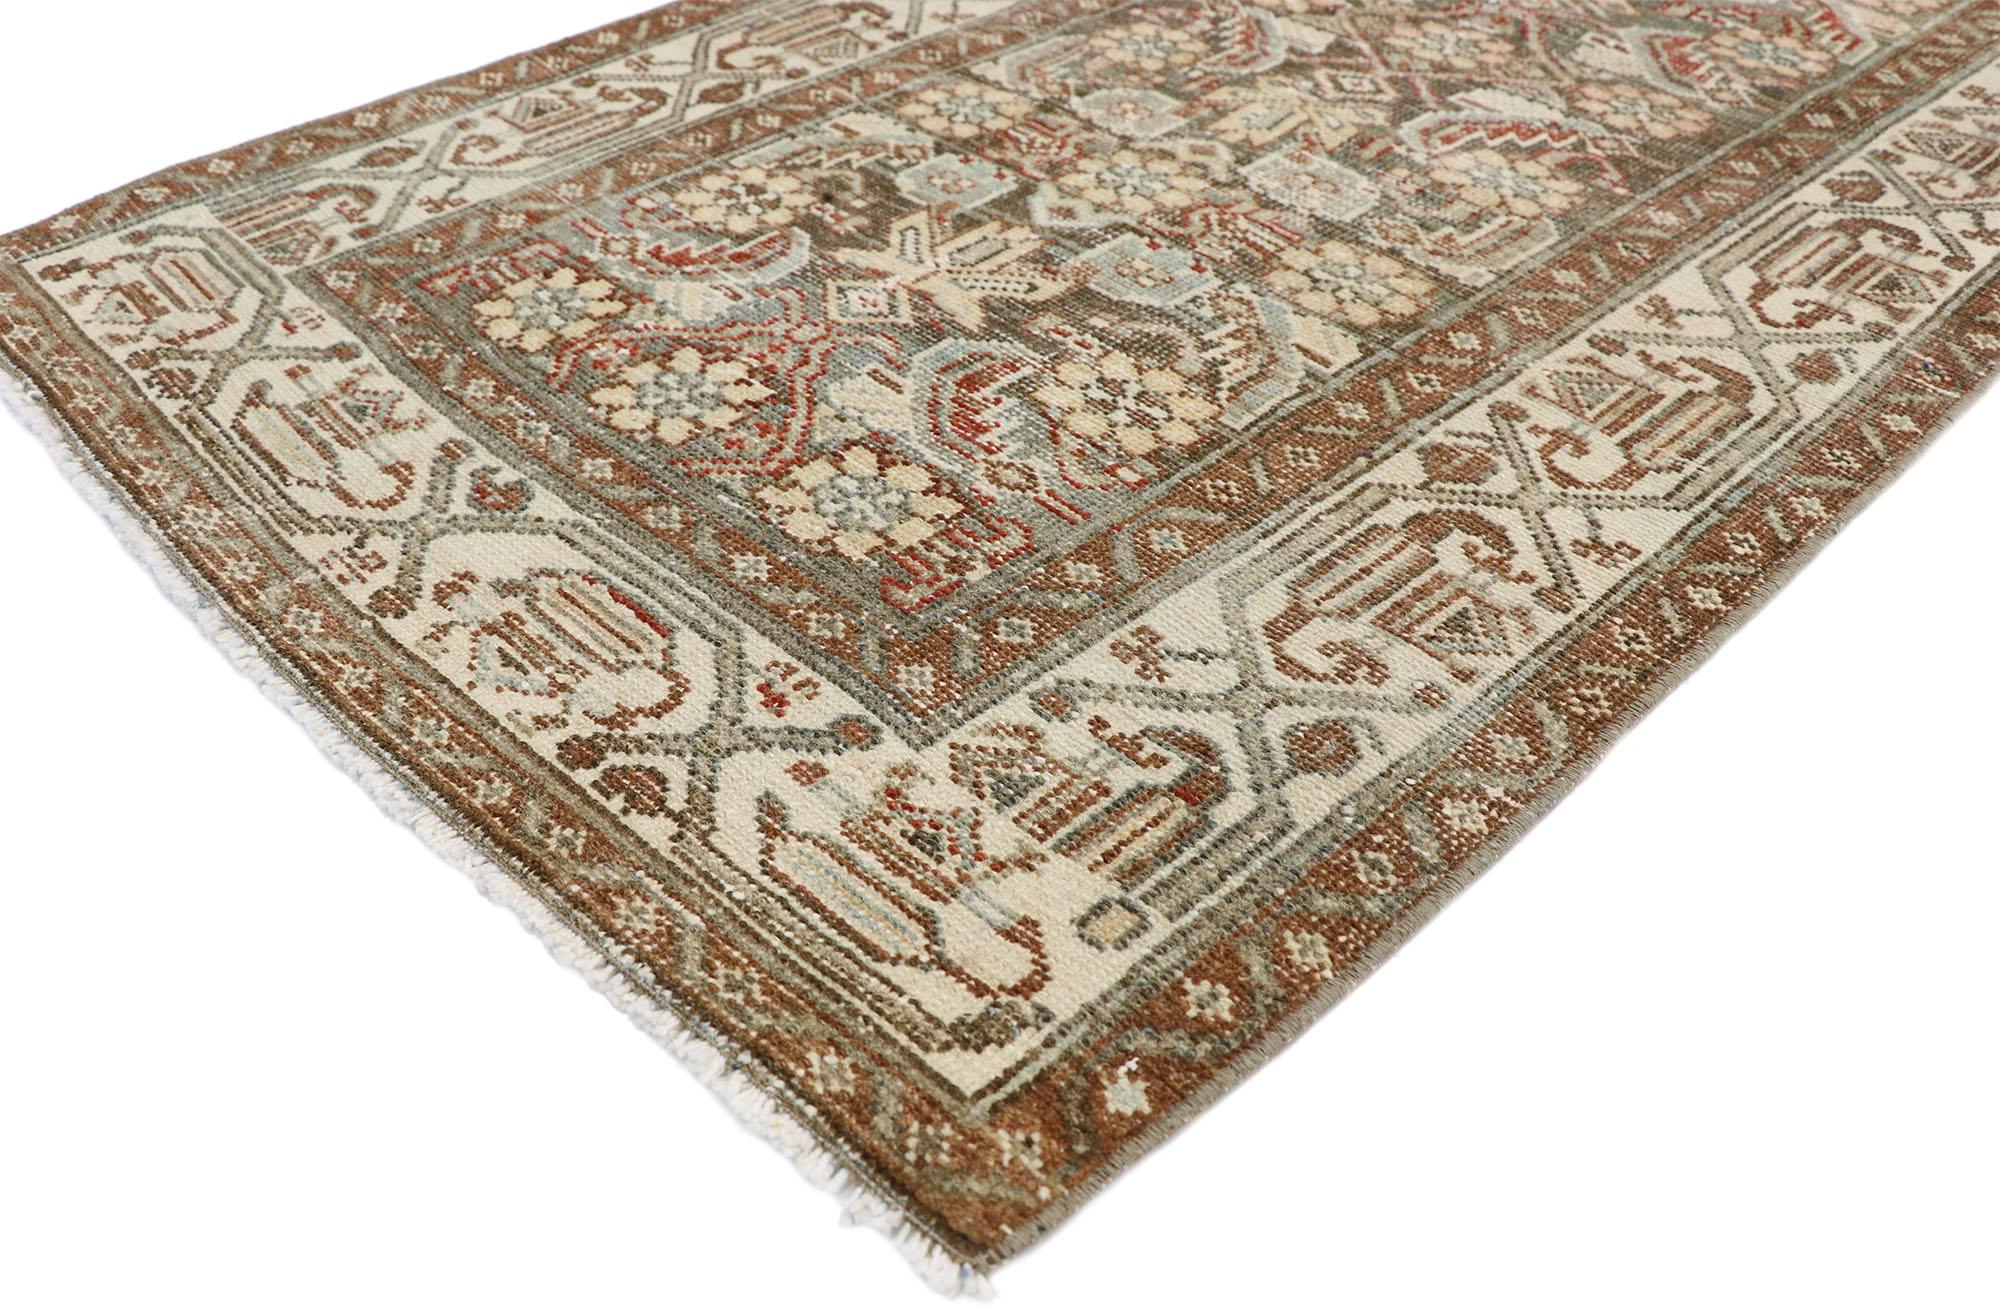 52553, distressed antique Persian Malayer design runner with Rustic Craftsman style. Warm and inviting combined with its geometric pattern and weathered composition, this hand knotted wool distressed antique Persian design runner embodies a rustic